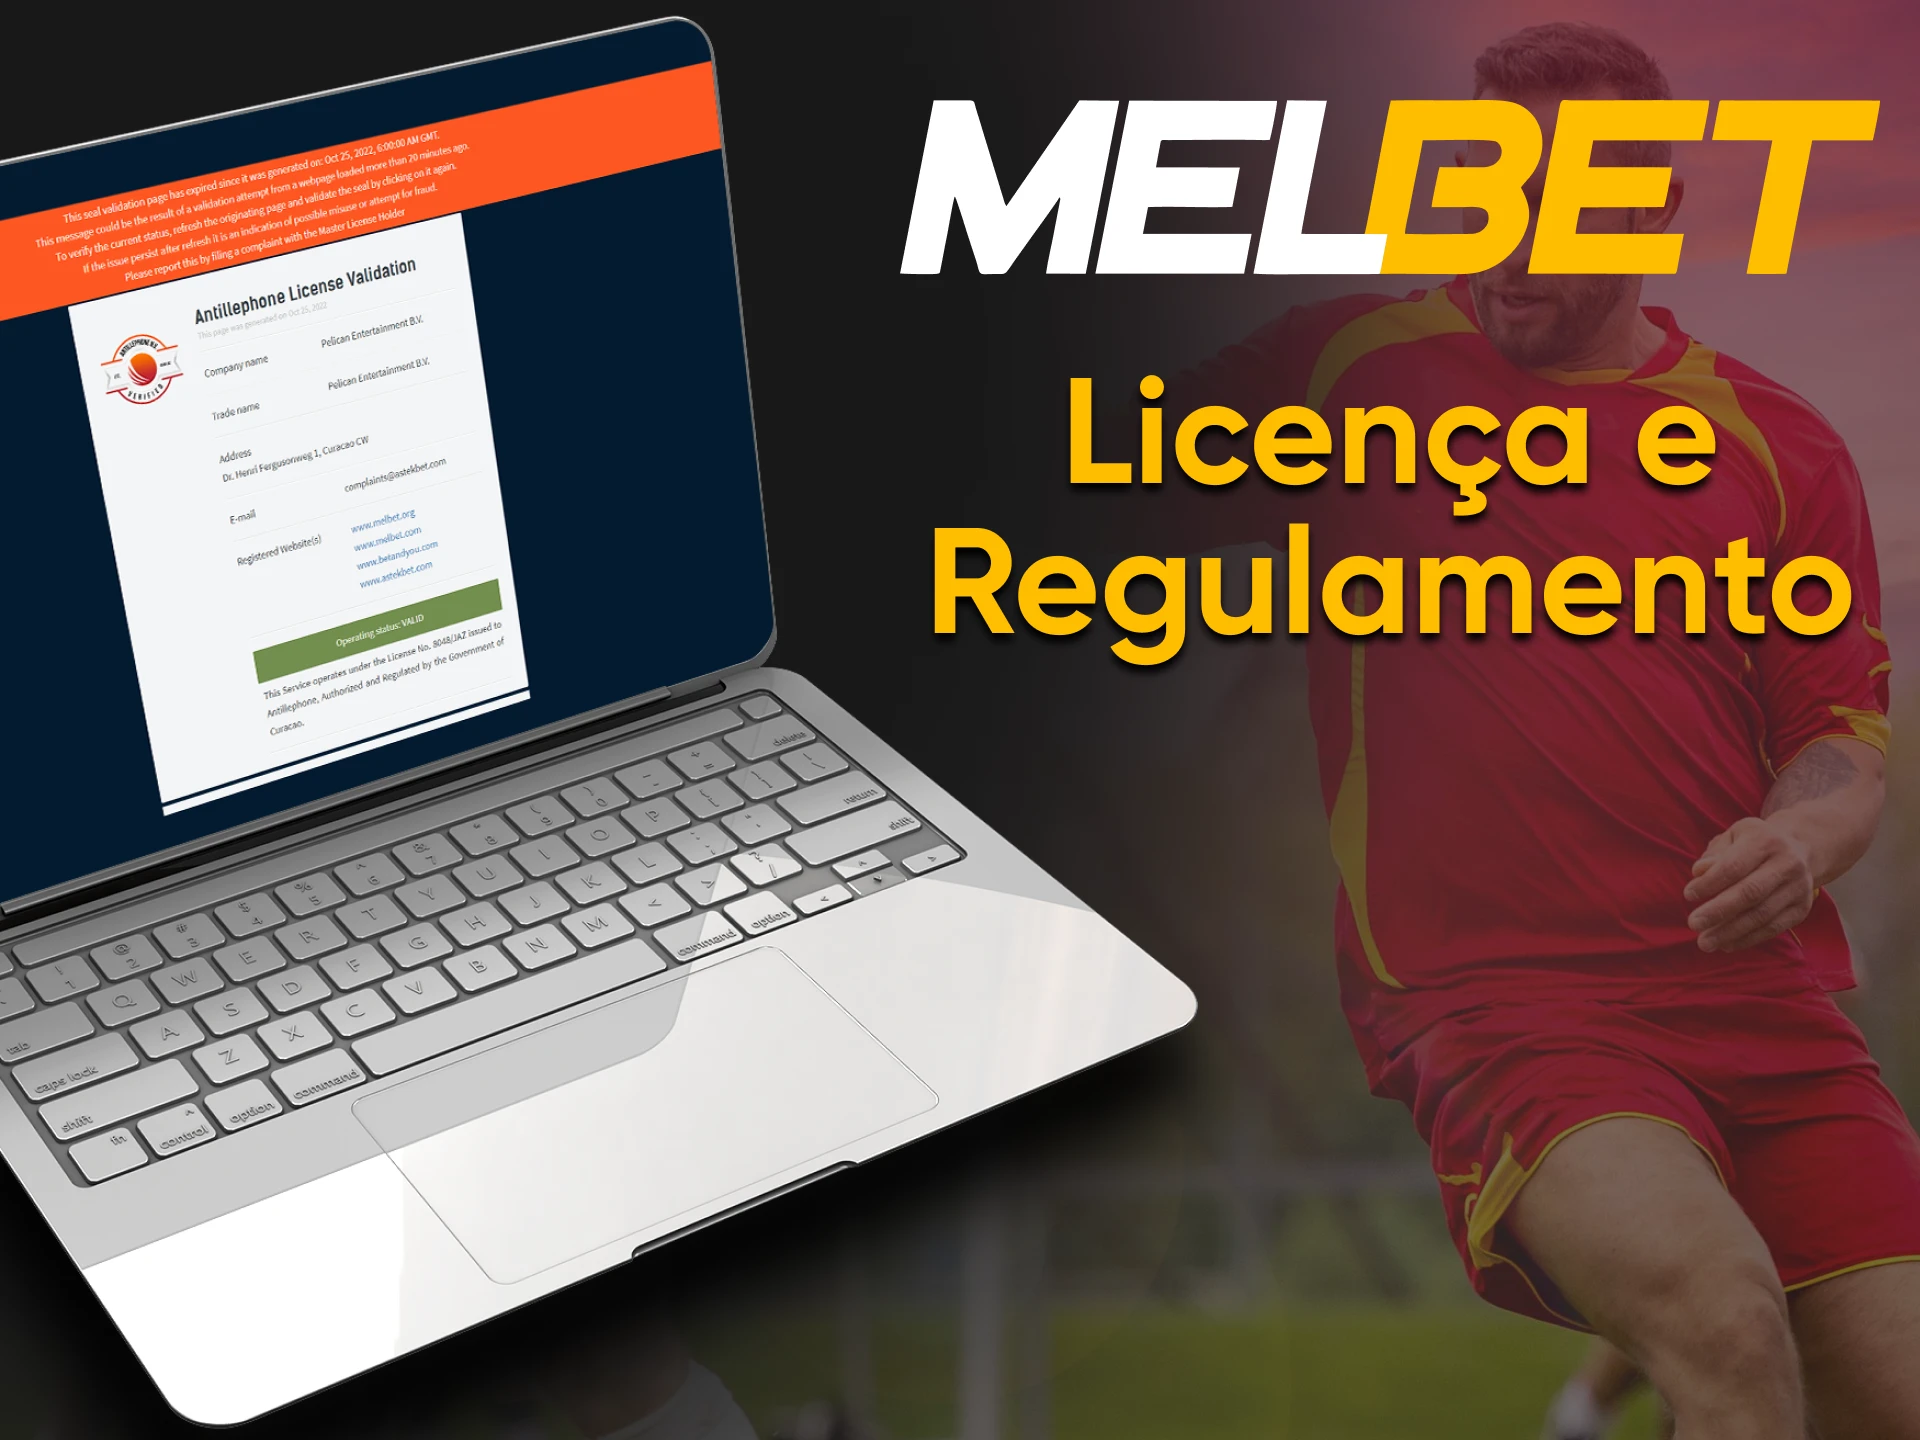 It is absolutely legal to use the Melbet betting platform.